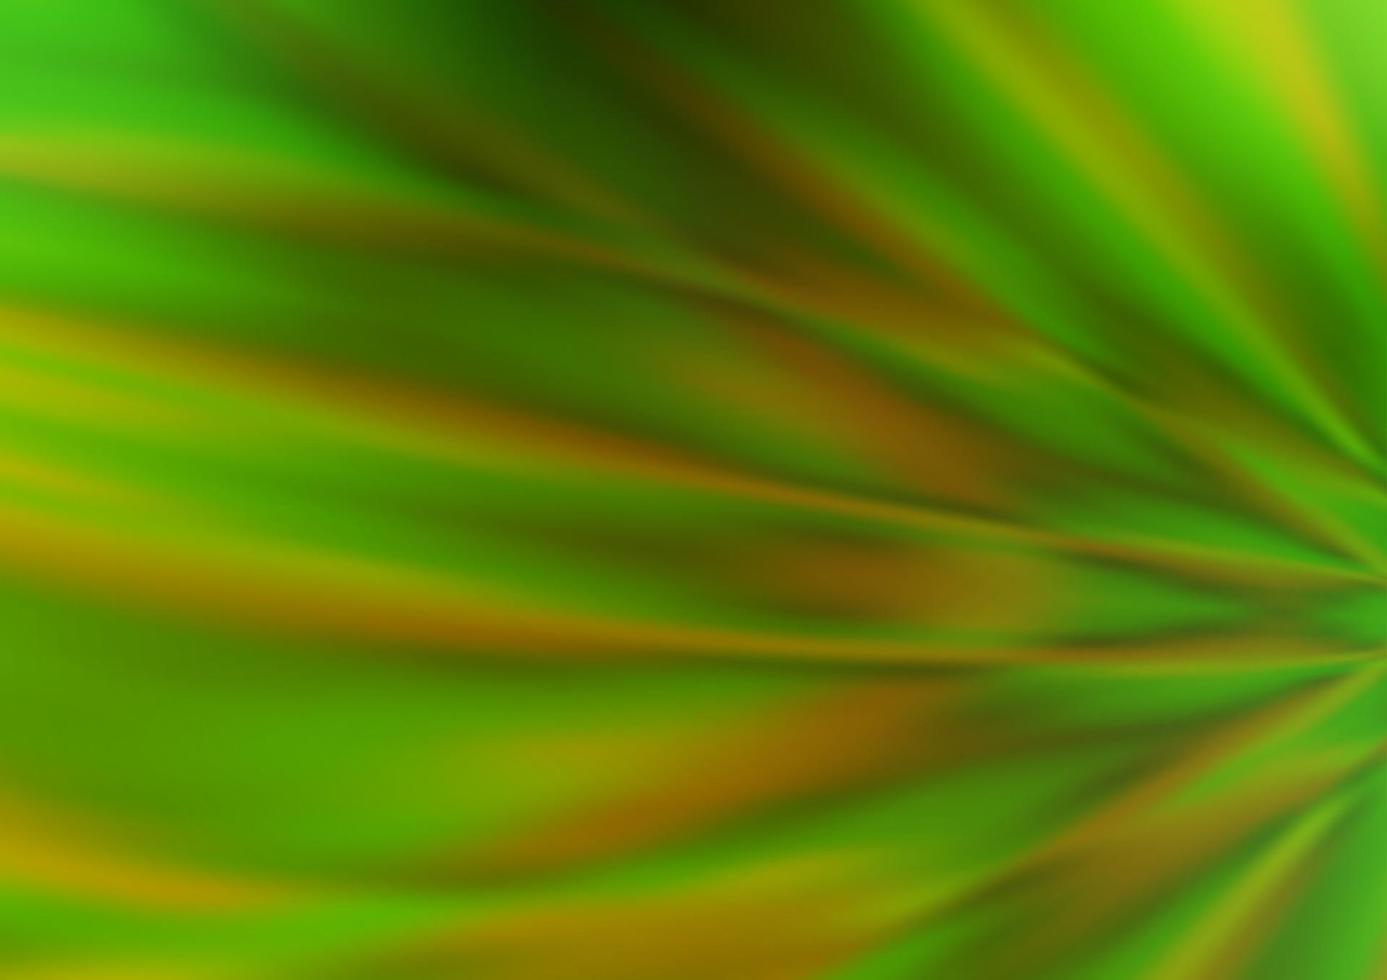 Light Green, Yellow vector abstract blurred background.